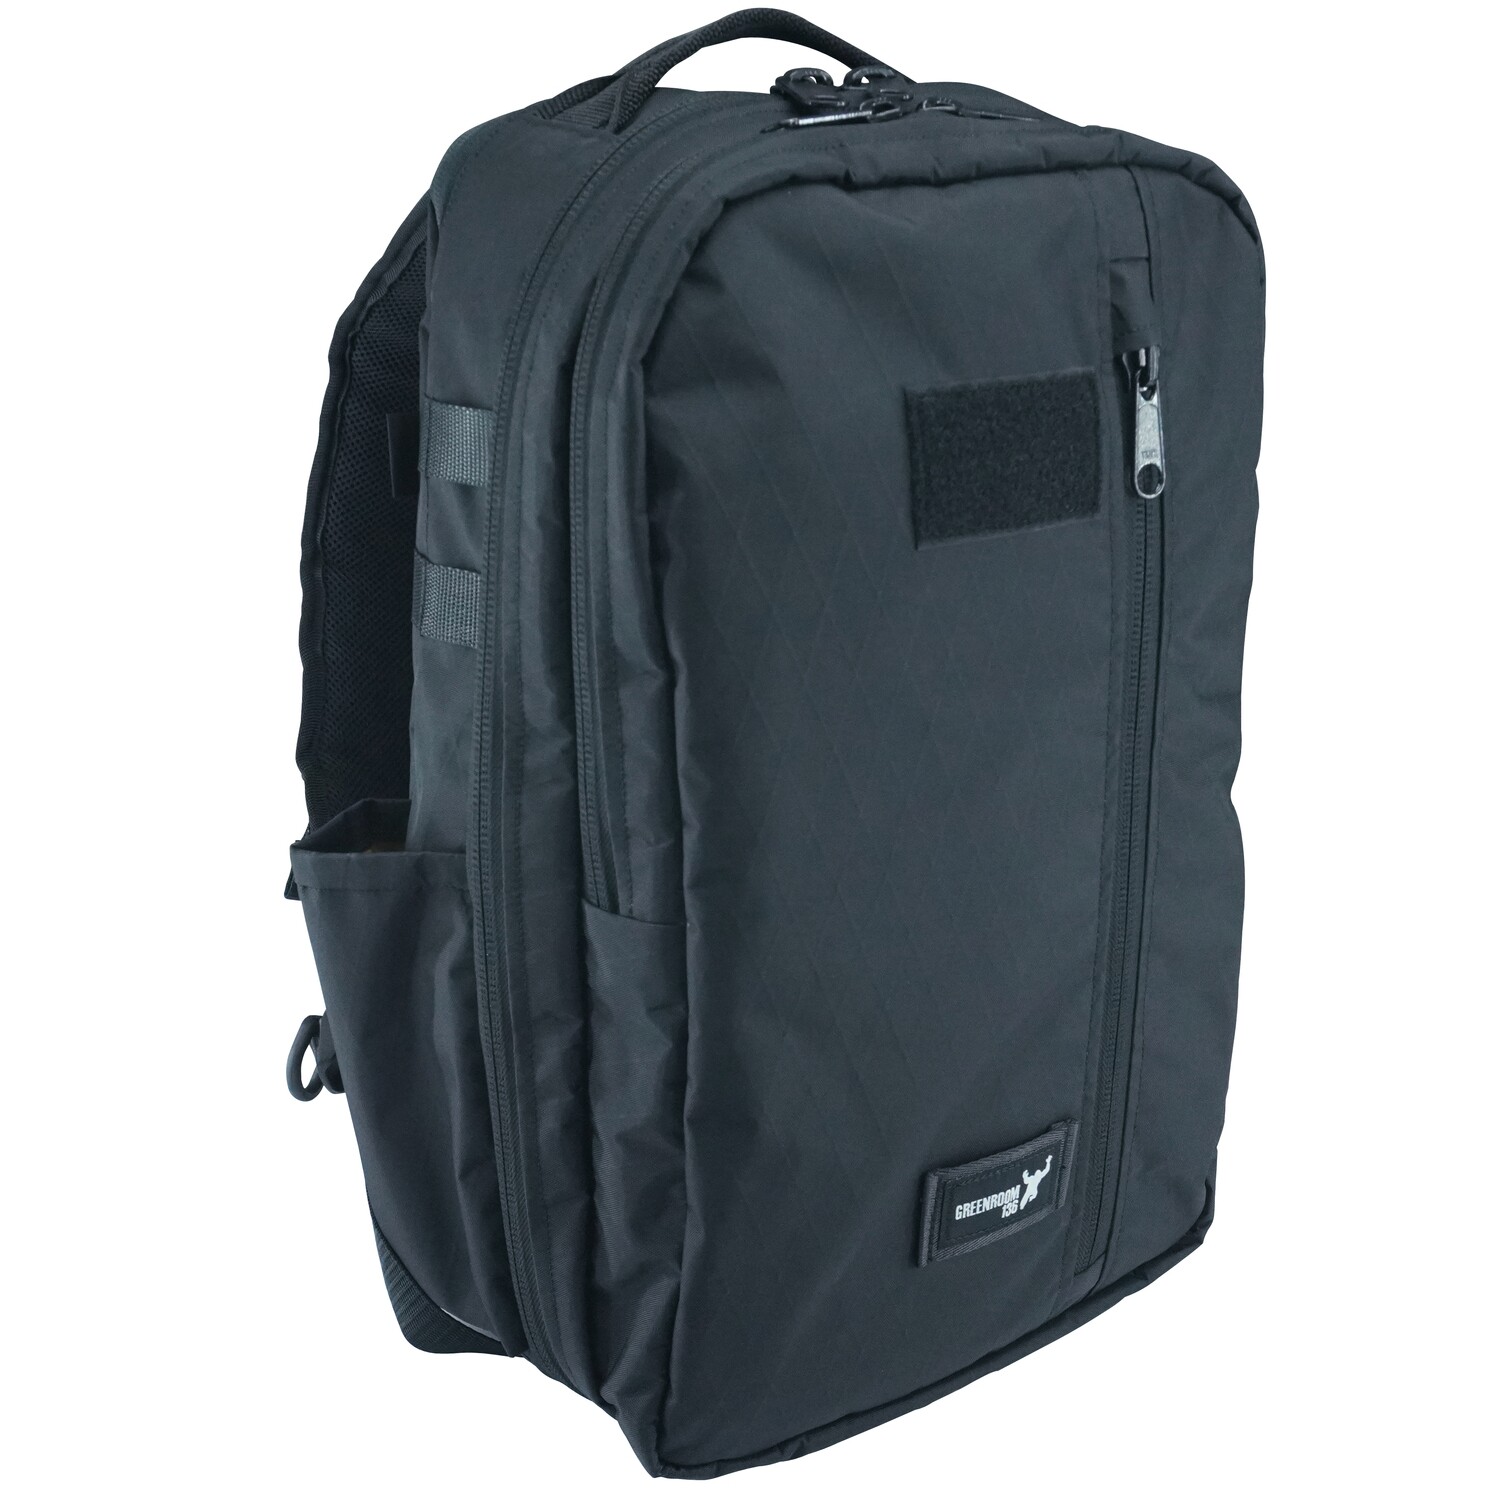 5.11 Tactical Bags, The best prices online in Malaysia